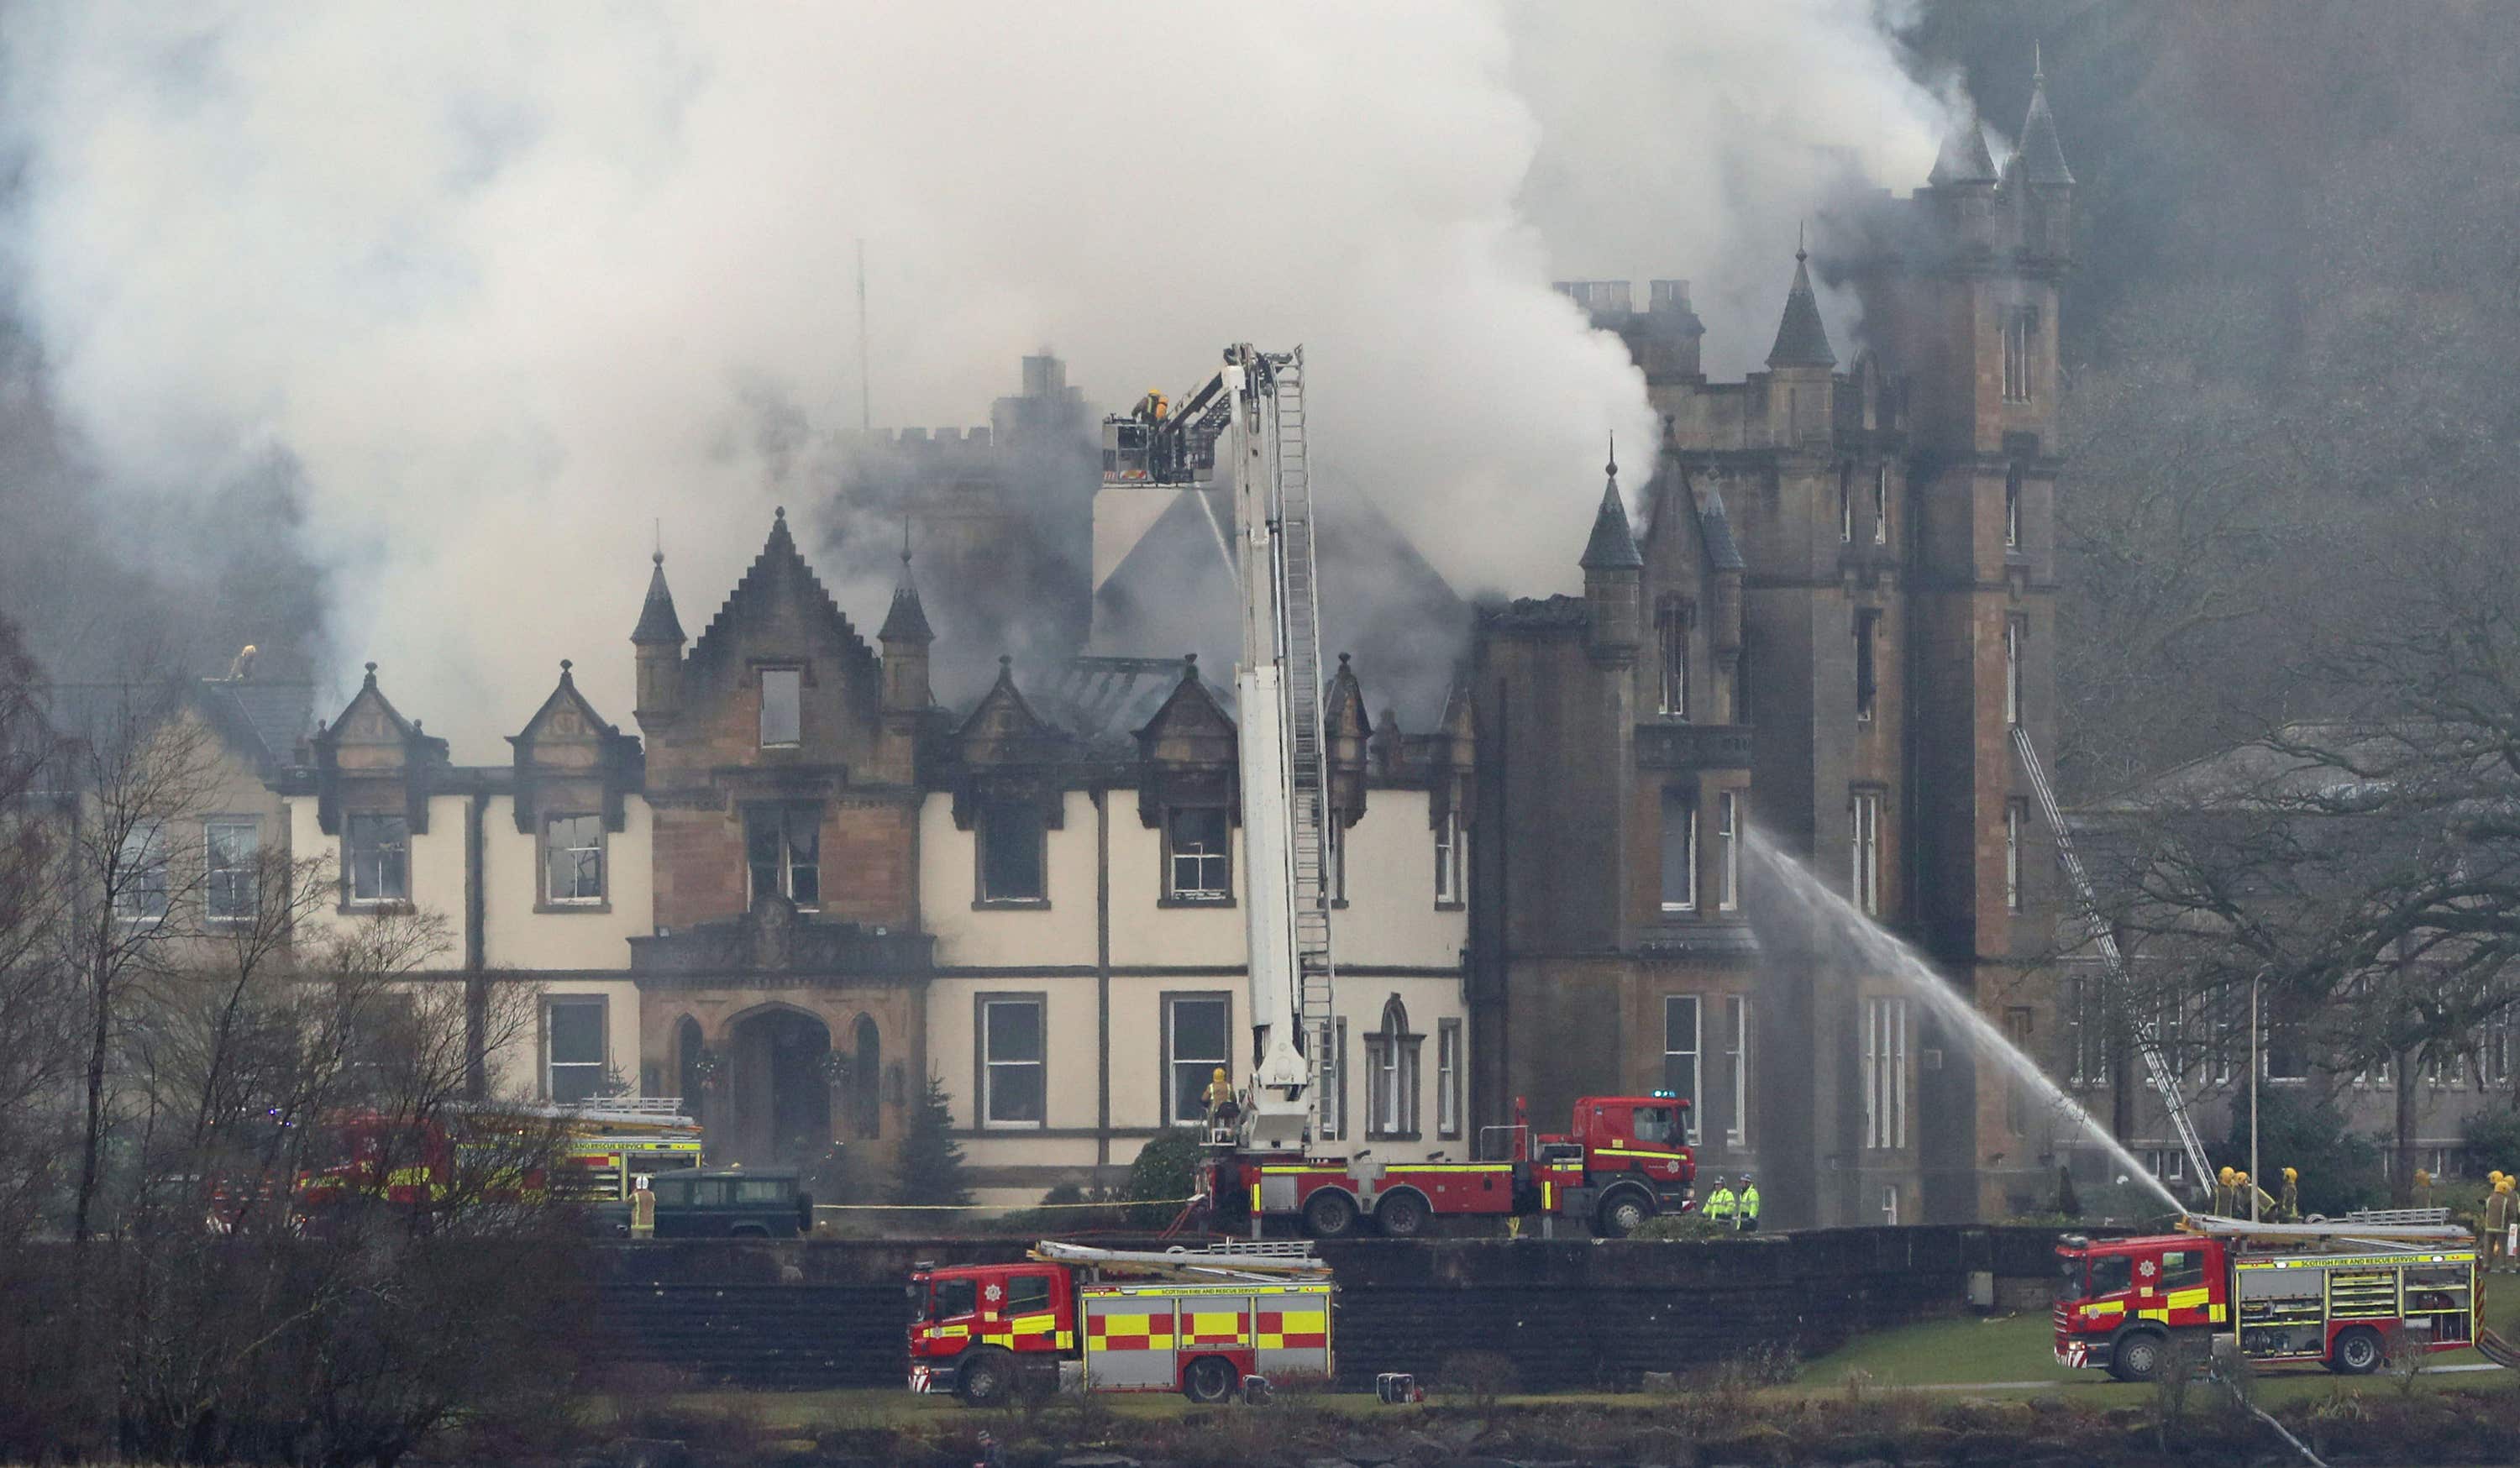 Cameron House Hotel went up in flames in December 2017. (Andrew Milligan/PA)